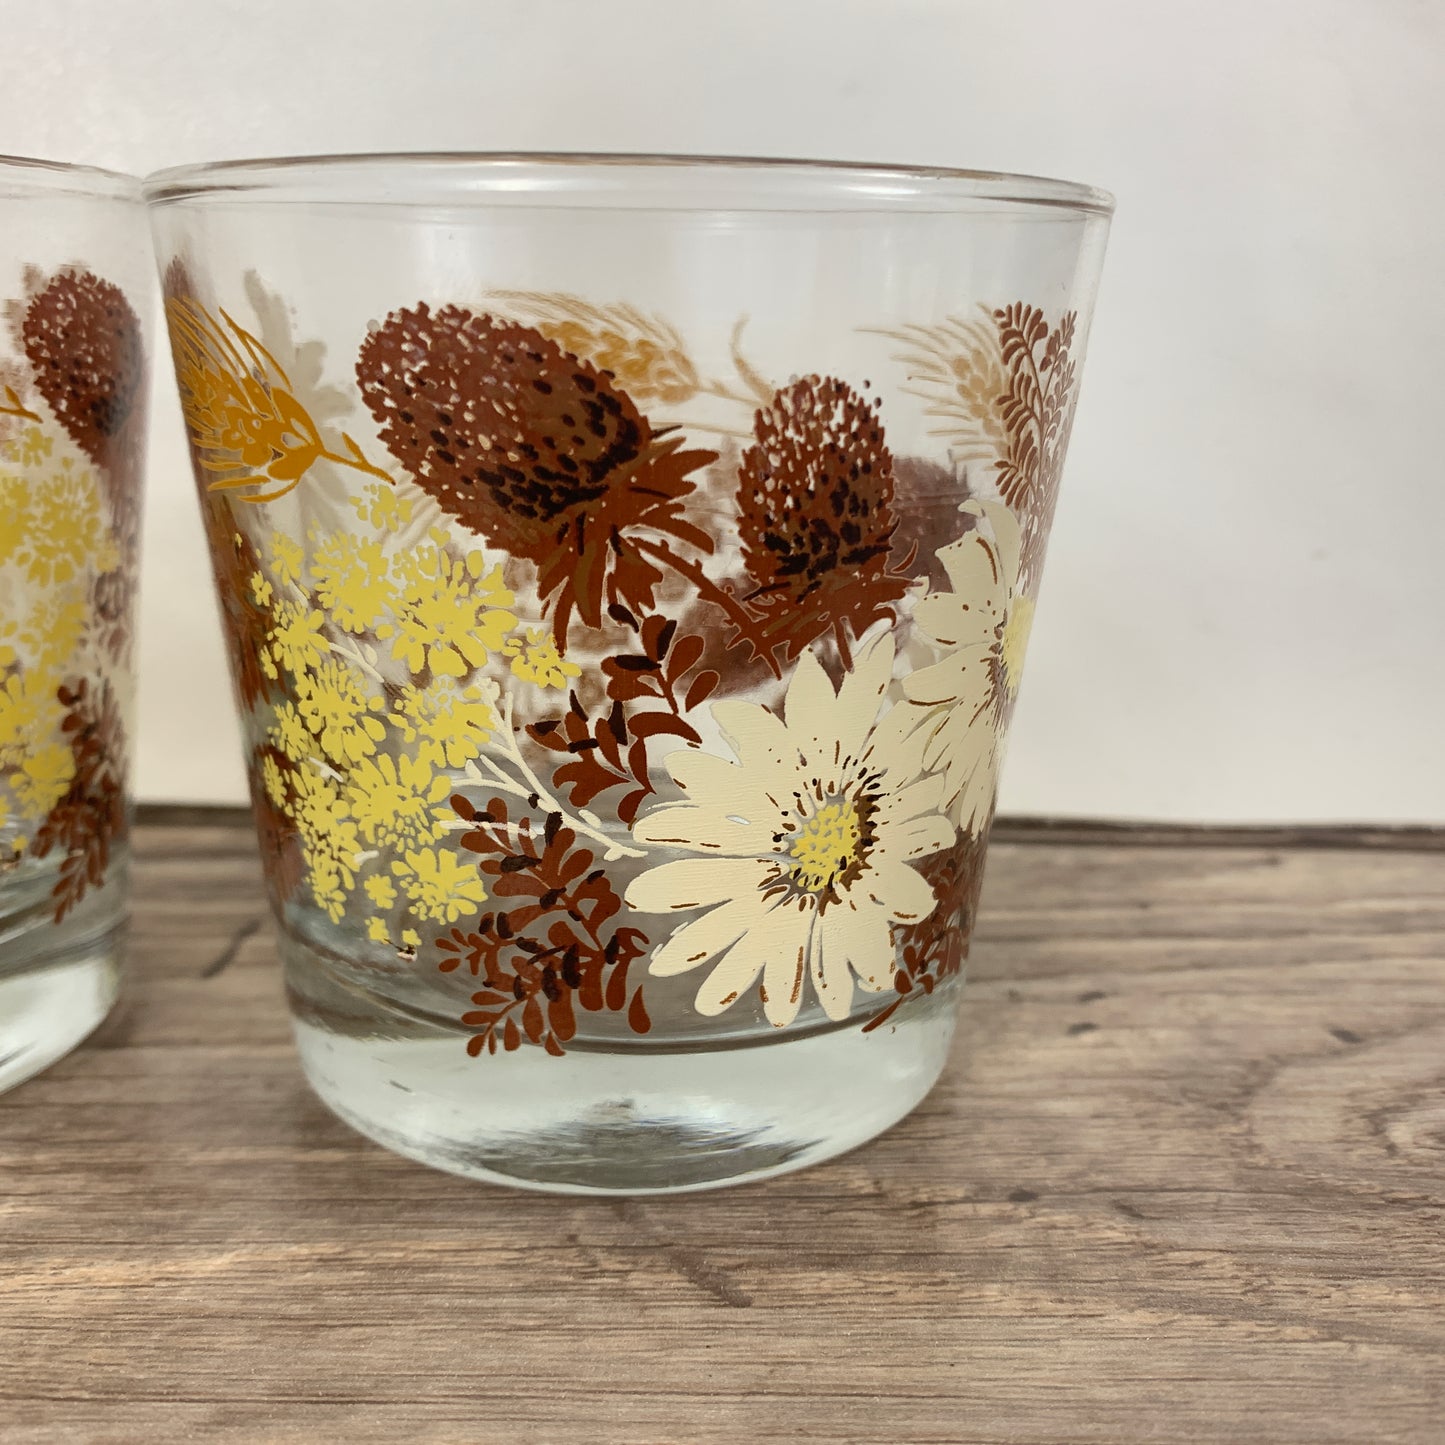 Vintage Juice Glasses with Fall Theme Design Set of 4